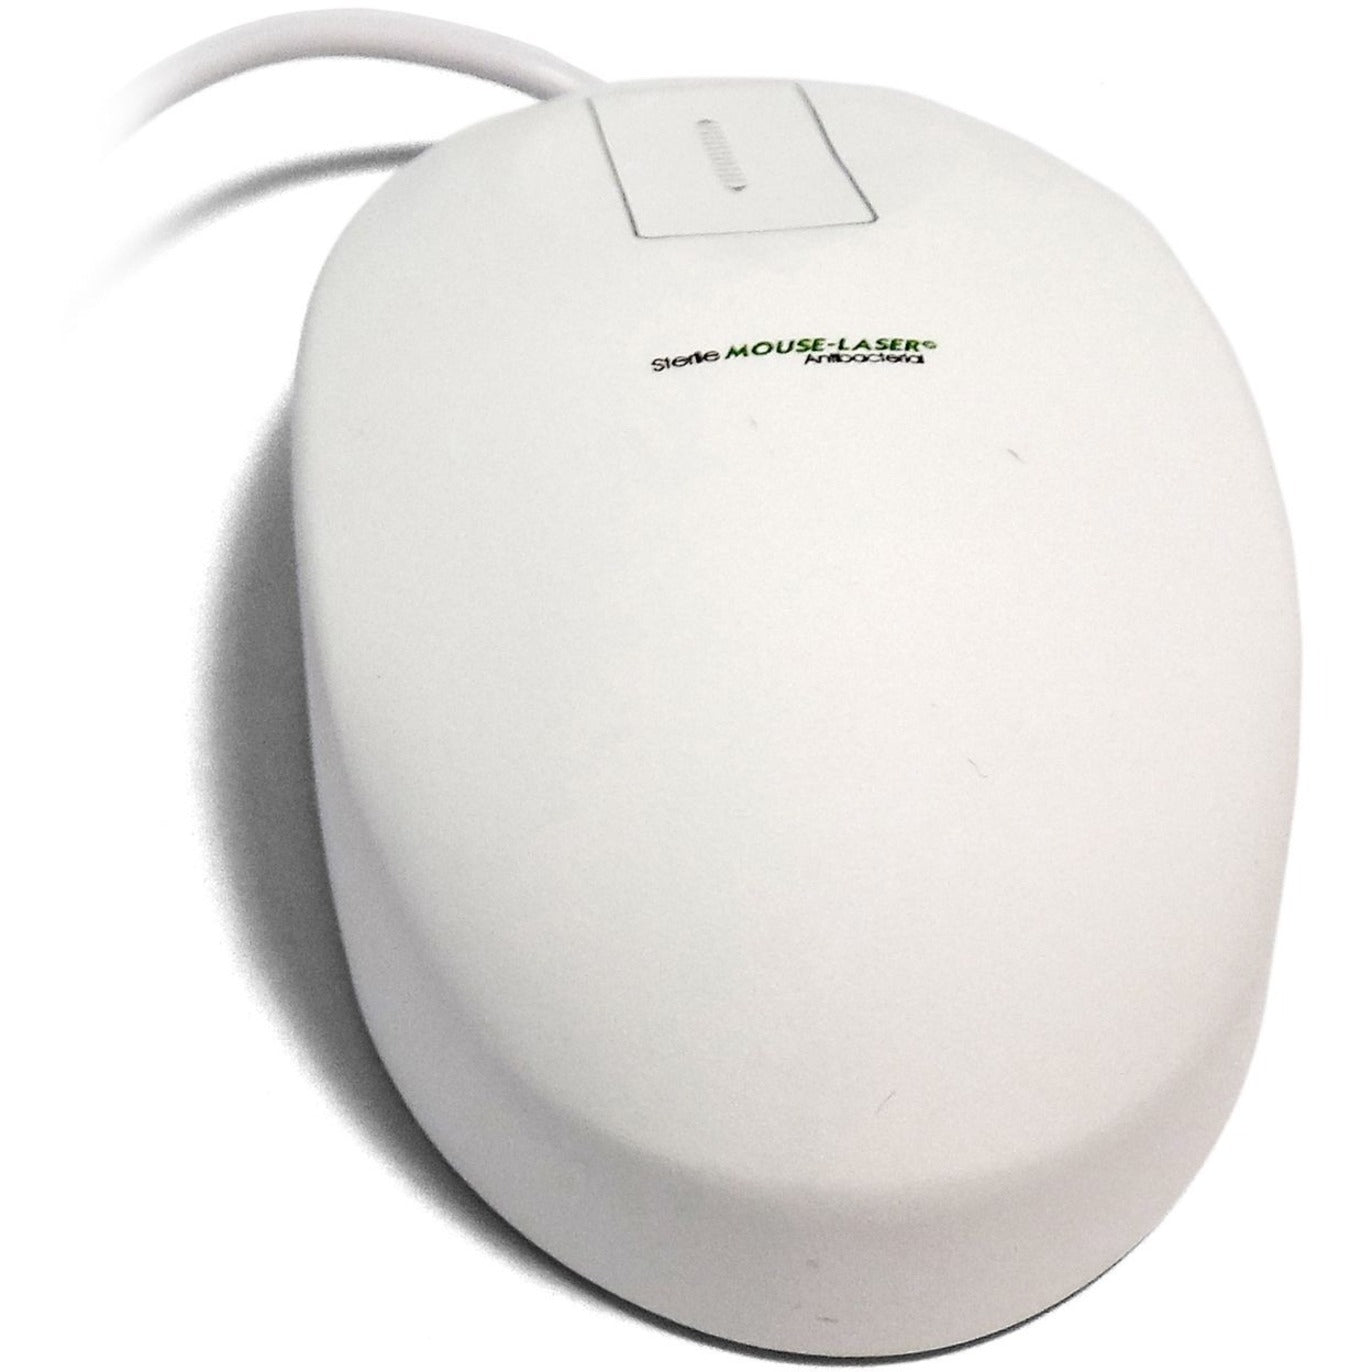 SterileFLAT SF08-14 SterileMOUSE-LASER Antibacterial Washable Mouse, 1 Year Limited Warranty, Laser Movement Detection, 5 Total Buttons, 800 dpi Resolution